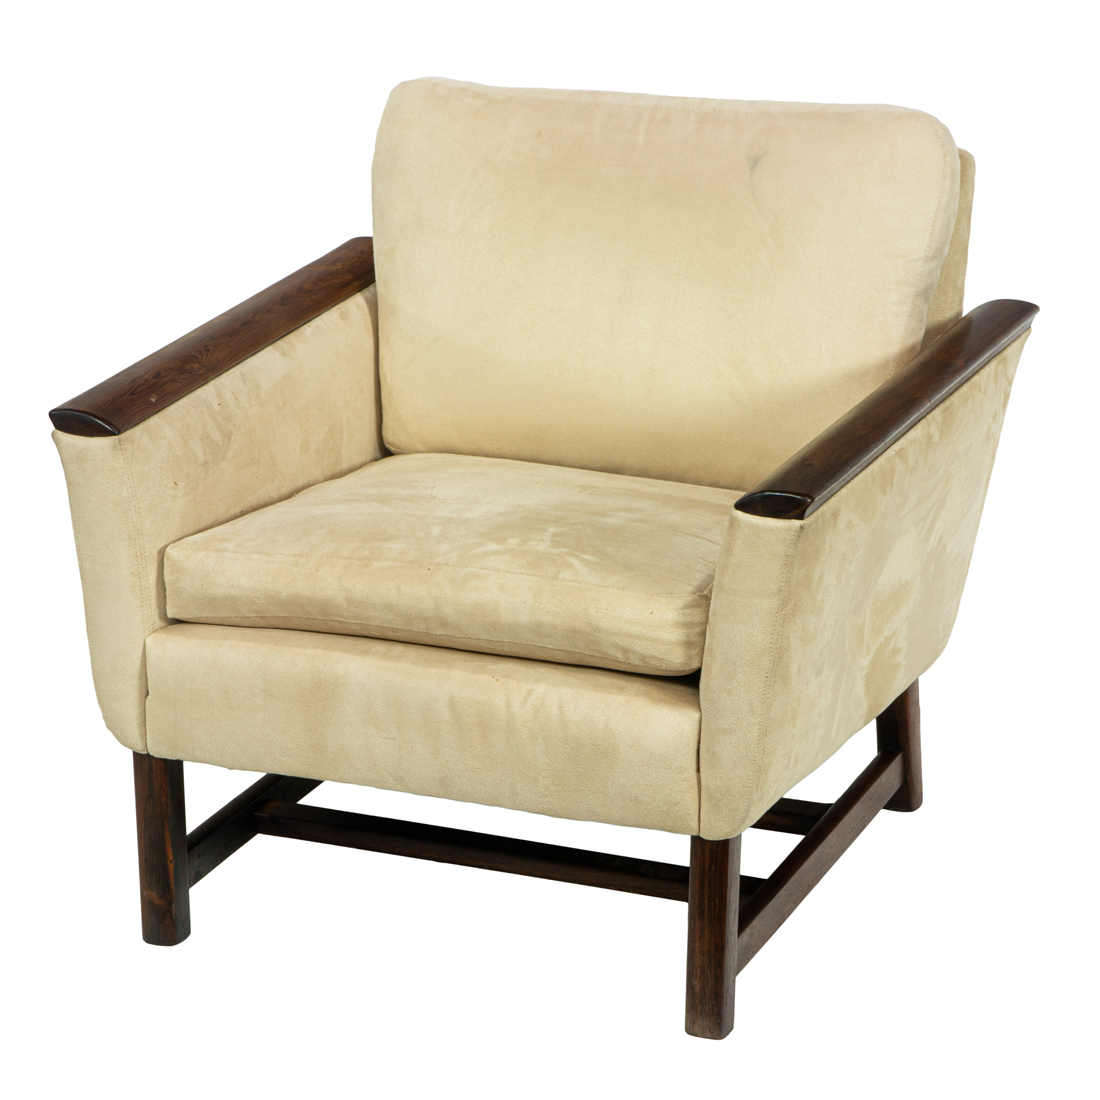 A MID CENTURY MODERN SUEDE UPHOLSTERED 3a198b